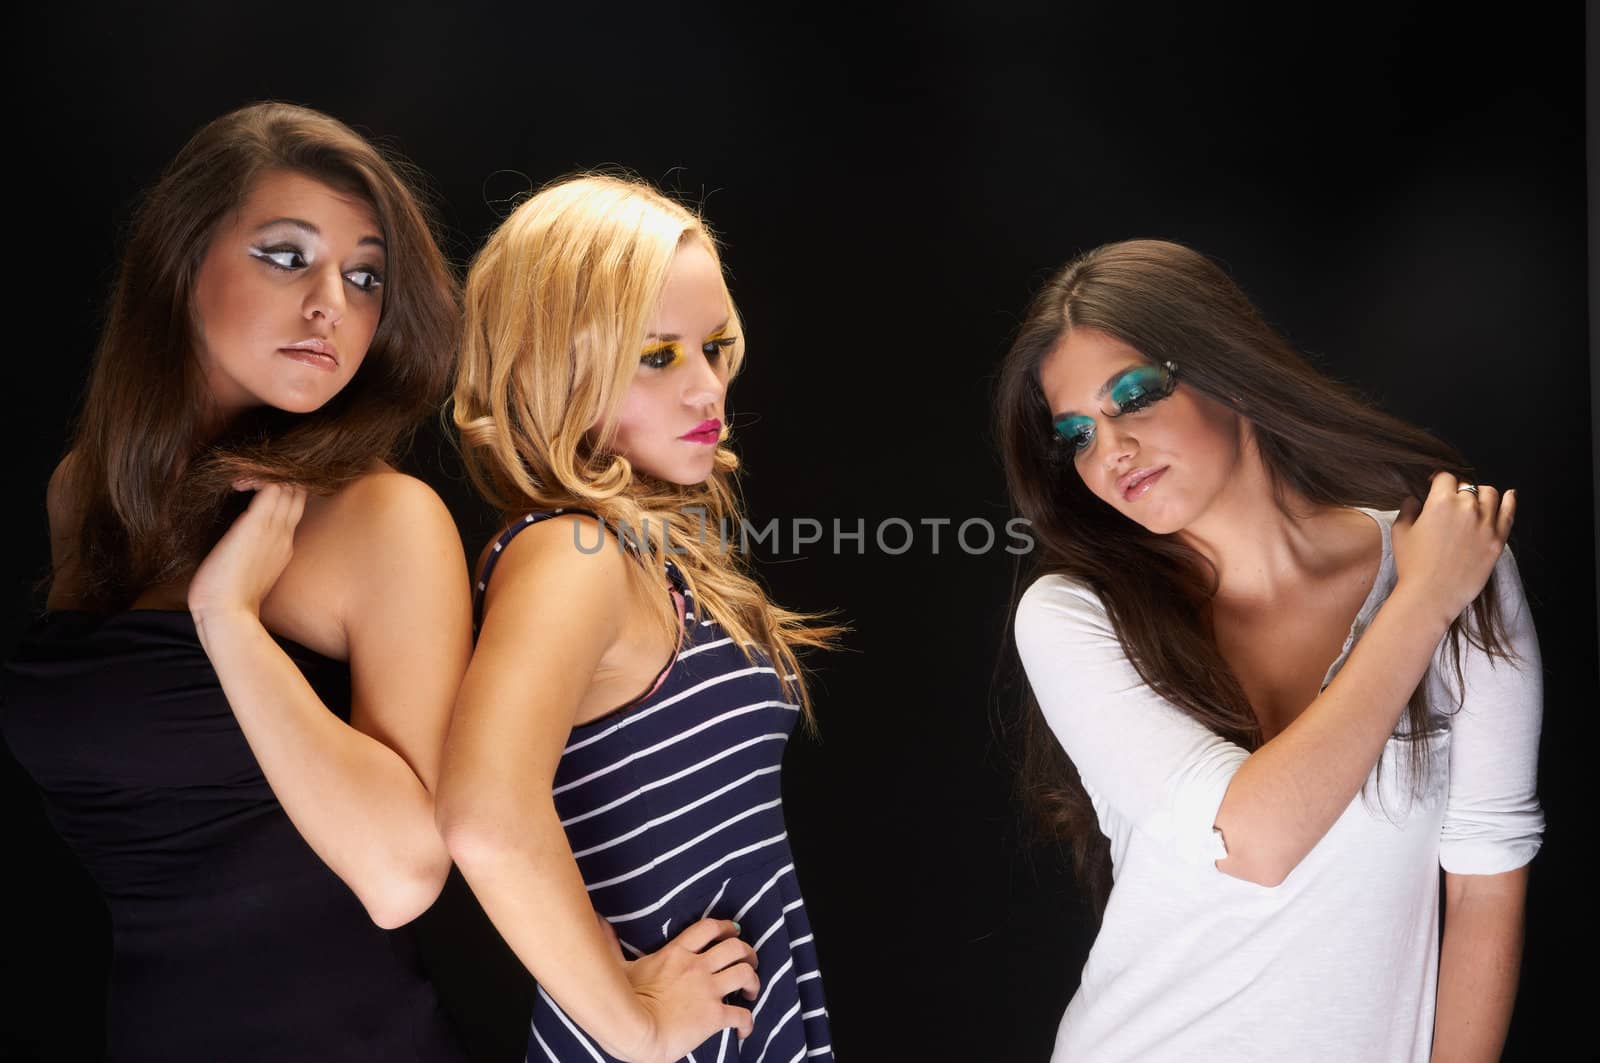 A group of young models against dark background by svedoliver